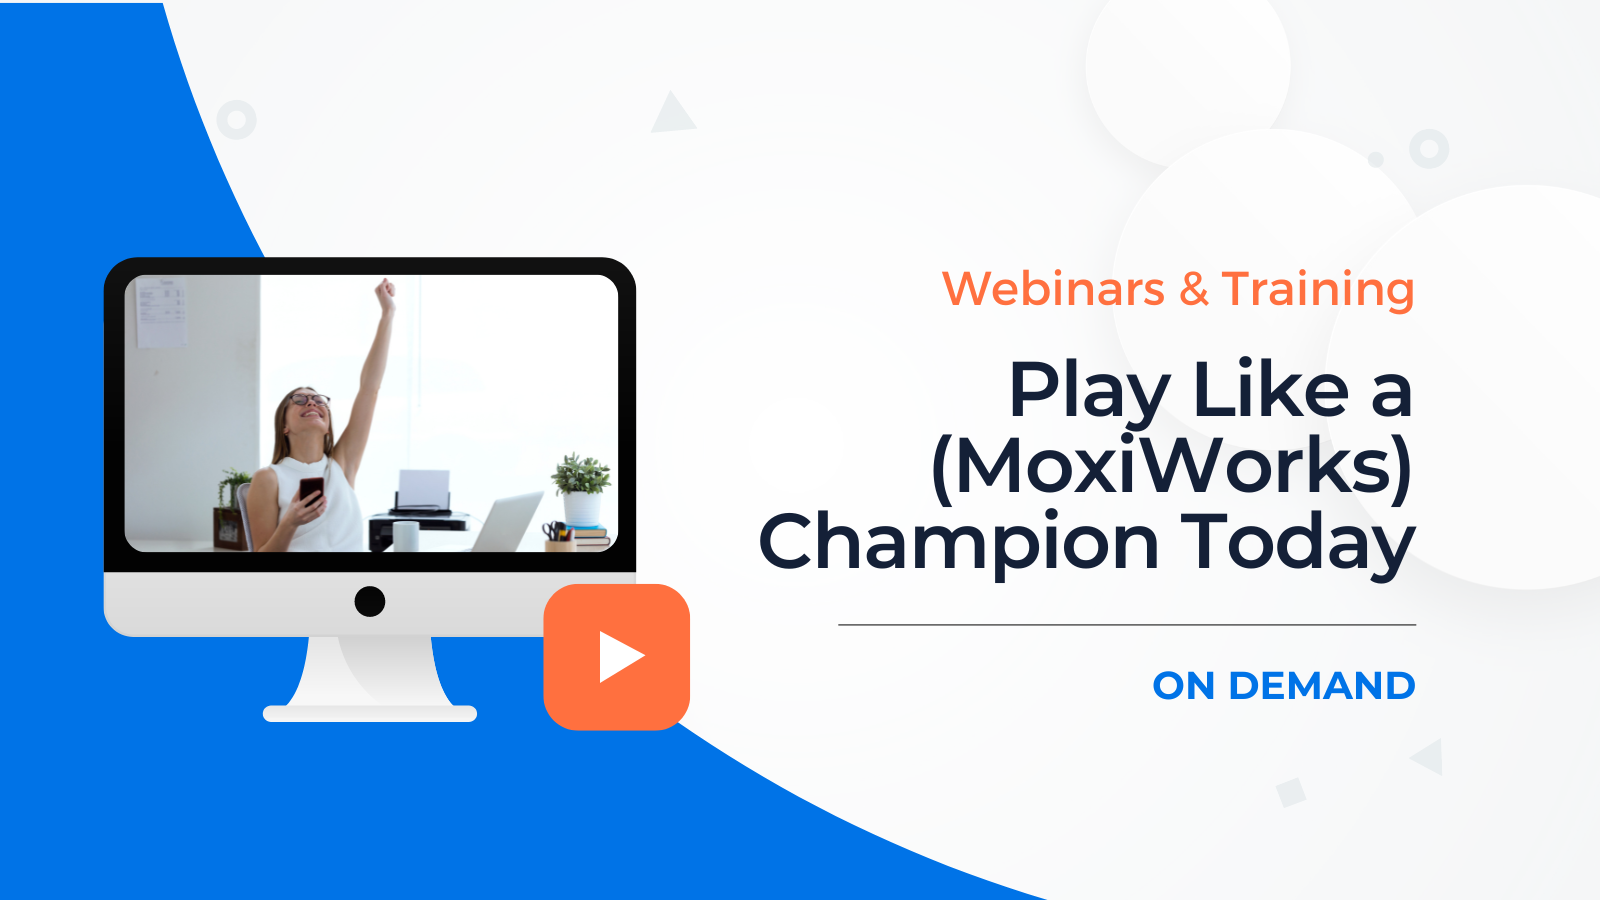 [WATCH NOW] Play Like a (MoxiWorks) Champion Today